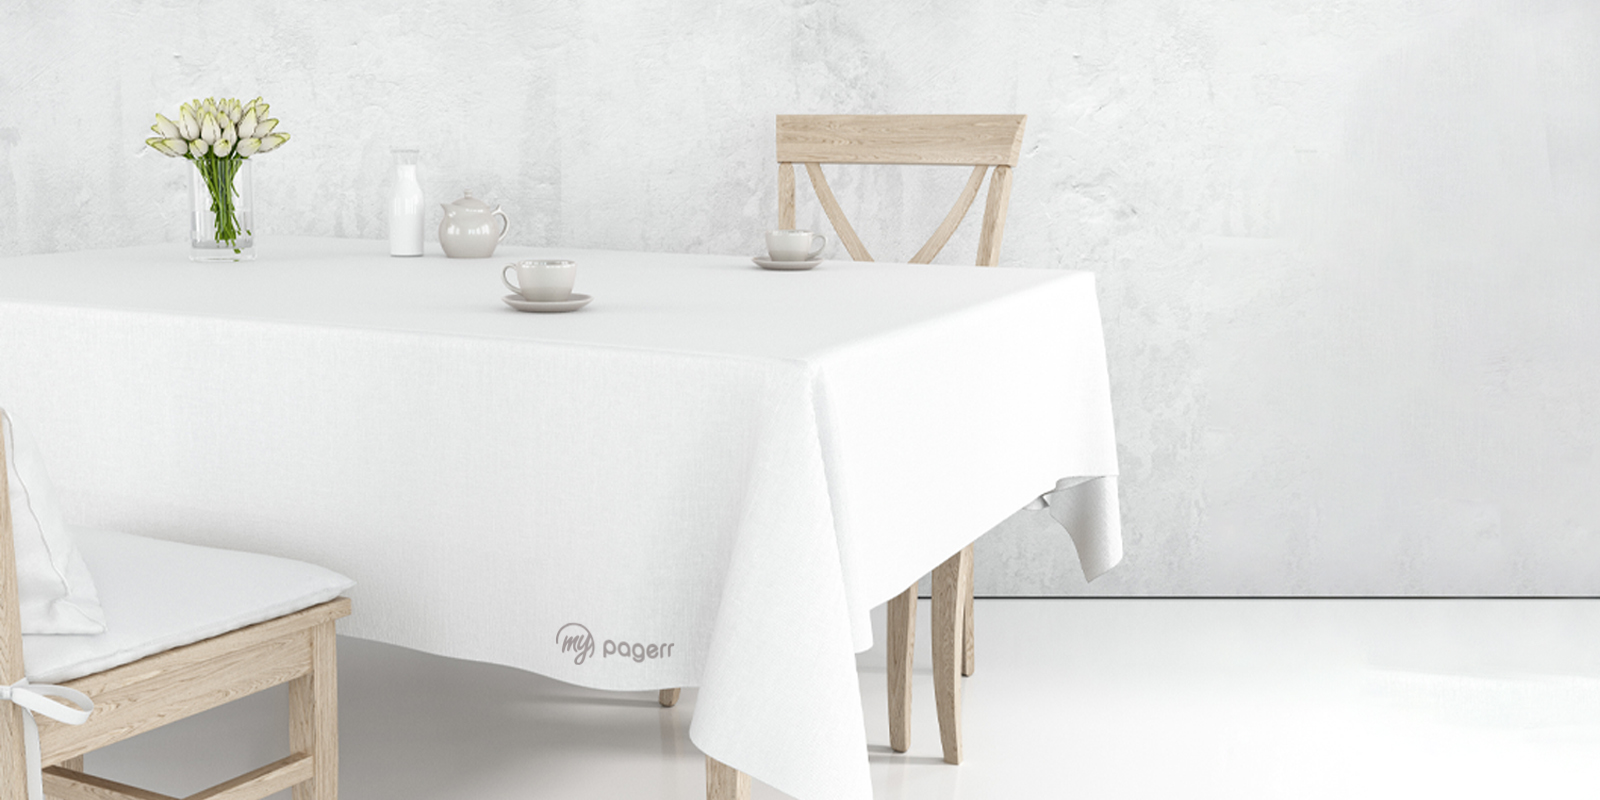 Tablecloths in Rockingham - Print with Pagerr